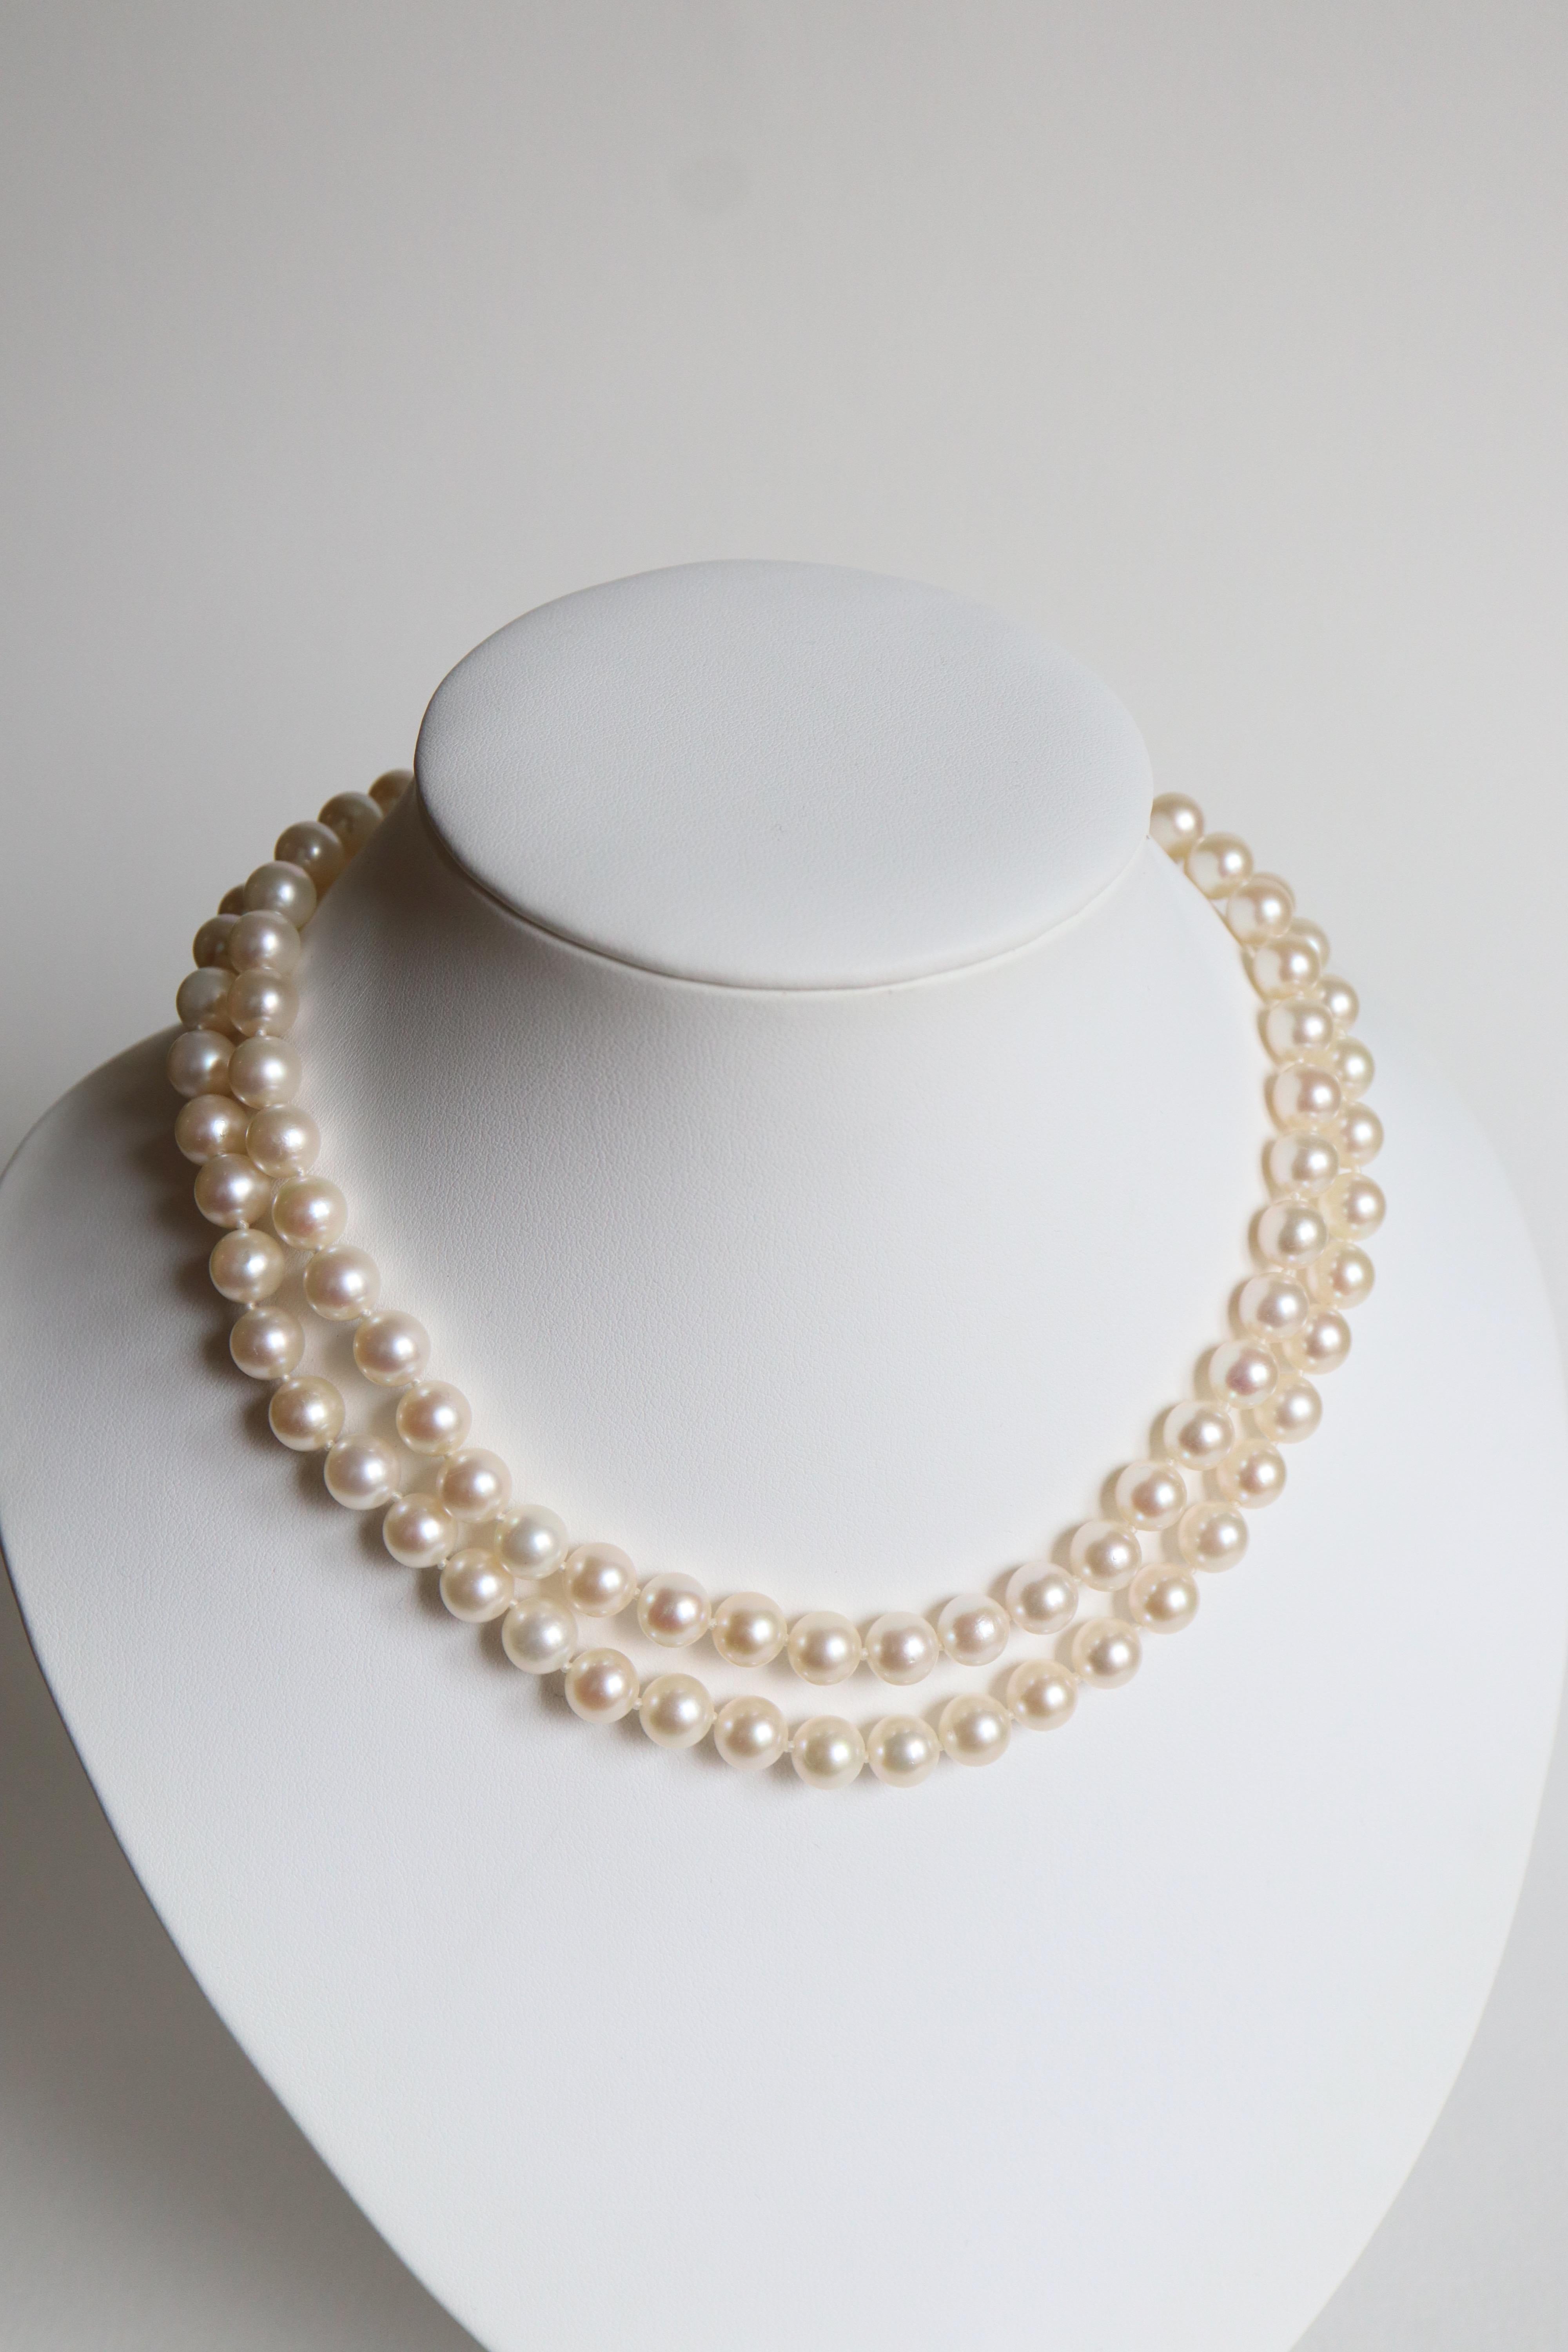 Necklace two Rows of Pearls Diameter 8.5 mm to 9 mm with 18 Carat yellow Gold Clasp Paved with Diamonds for about 1.5 to 2 Carats with a Central Pearl of 8.5 mm to 9 mm in Diameter.
First rand of Pearls: 44 Pearls
Second row of Pearls: 48